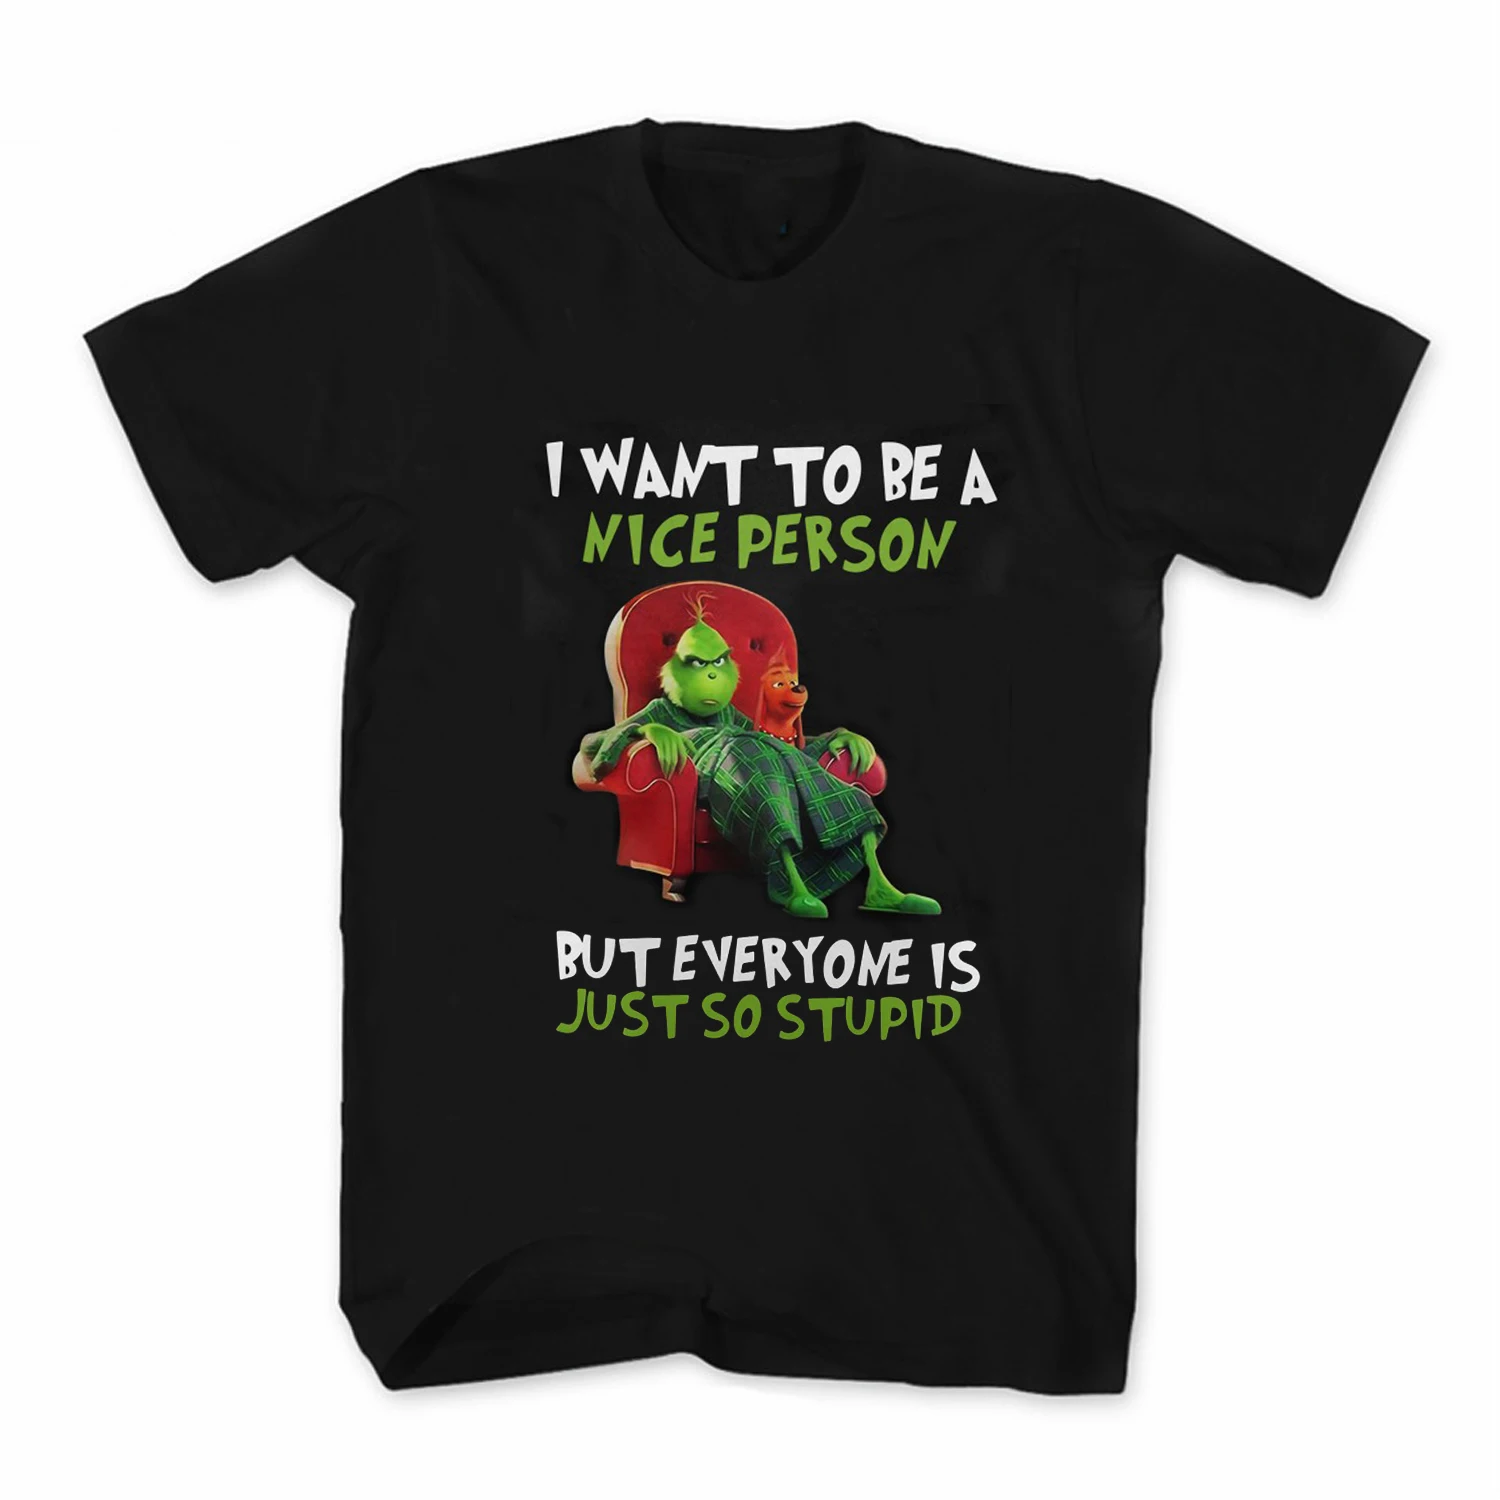 

I Want To Be A Nice Person But Everyoneis Just So Stupid. Funny Grinch T-Shirt. Cotton Short Sleeve O-Neck Unisex T Shirt S-3XL